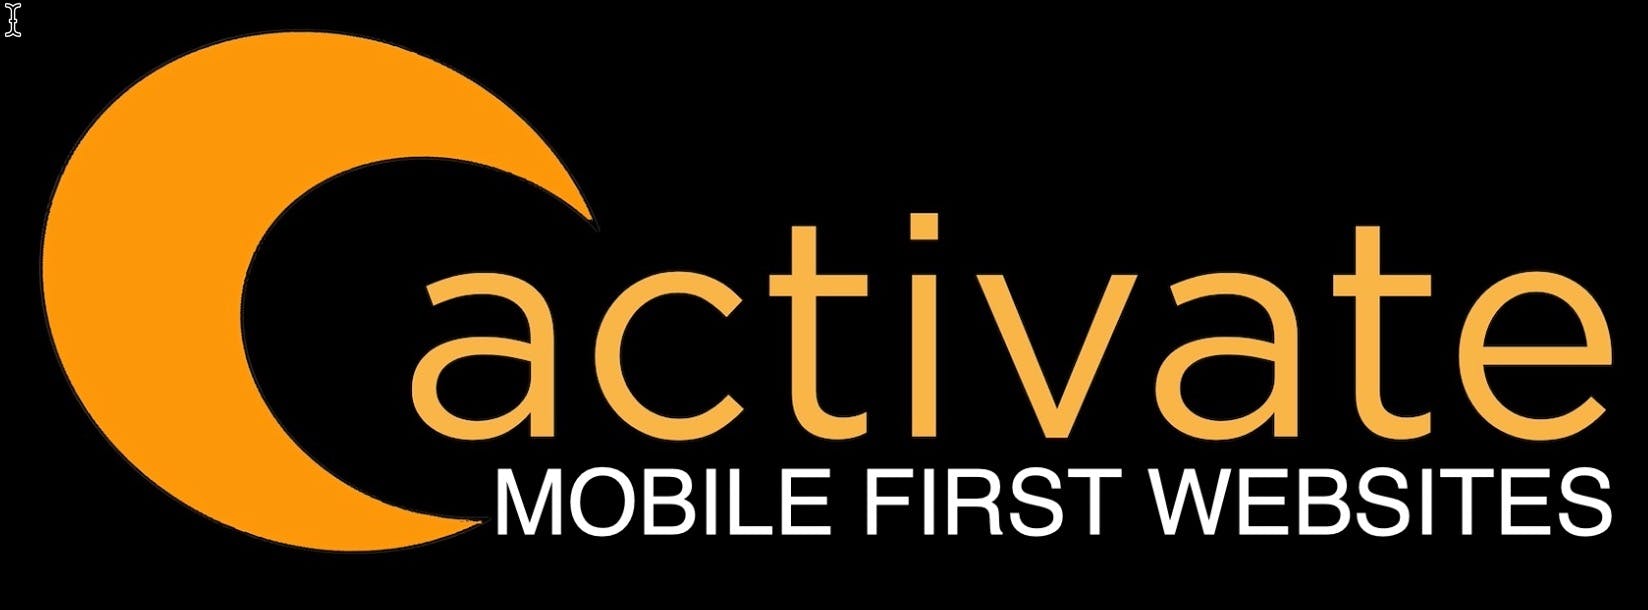 Activate Mobile First